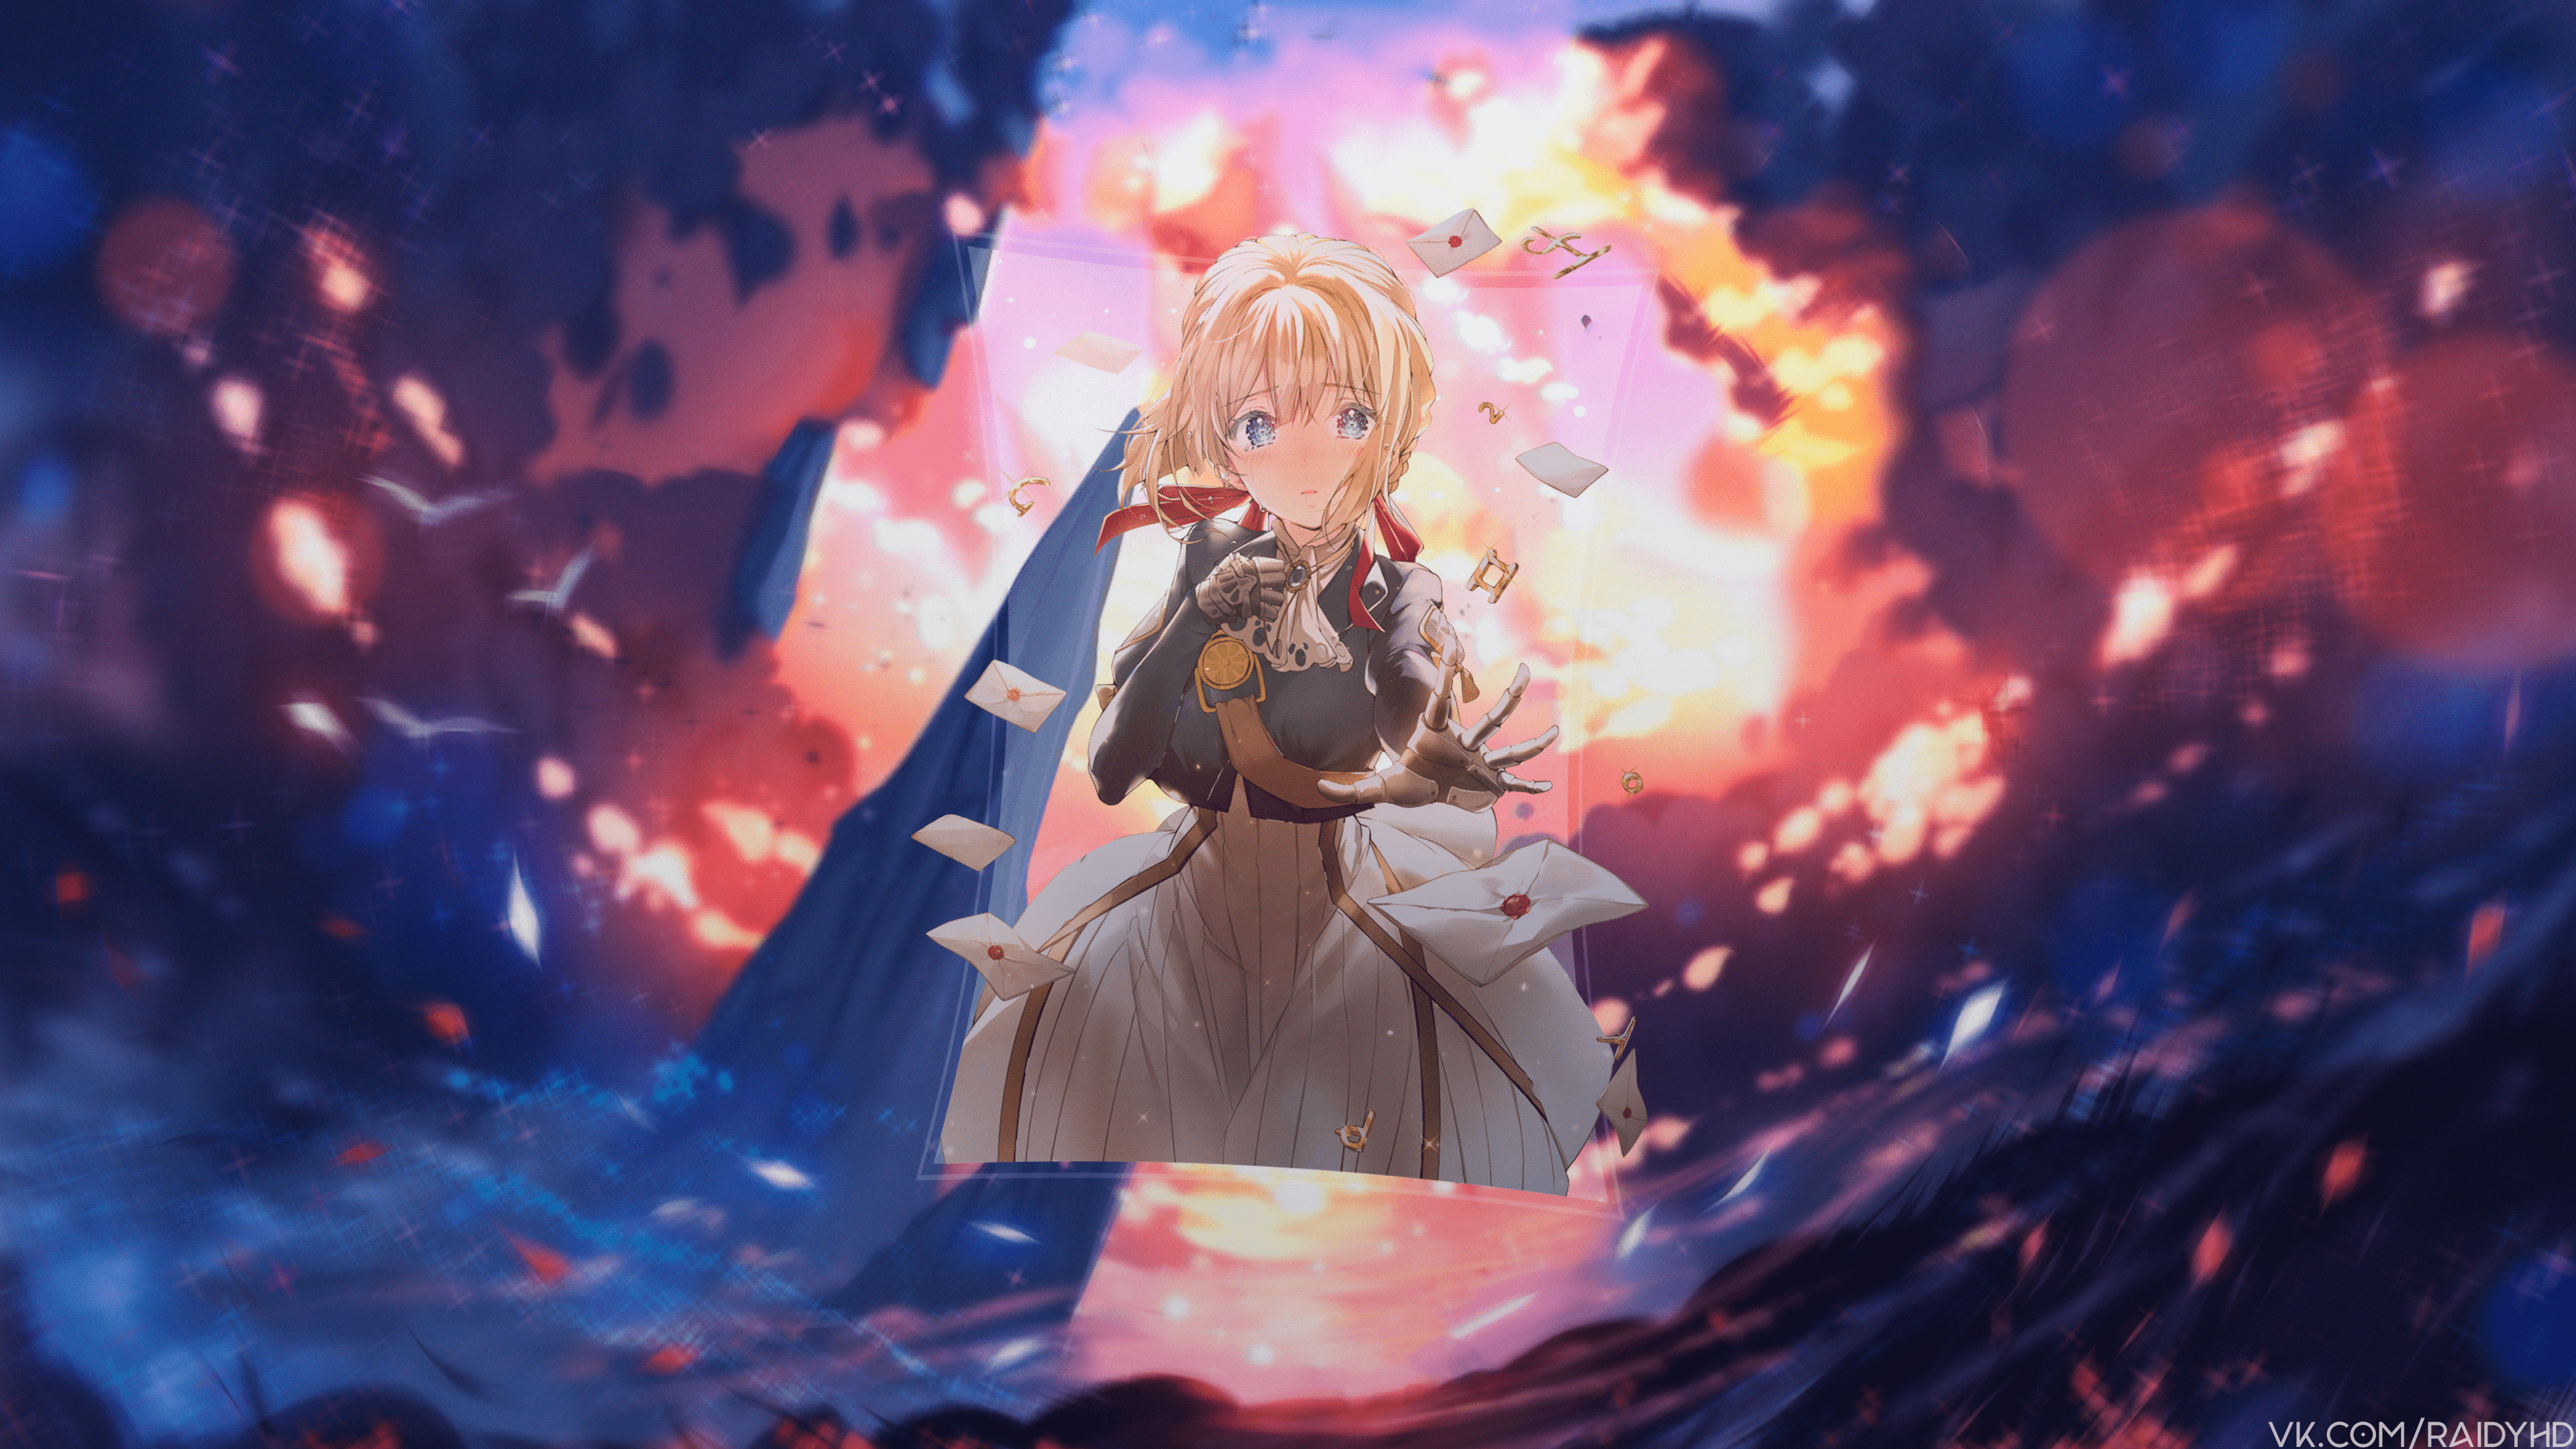 Violet Evergarden Anime Girls Anime Picture In Picture 3840x2160